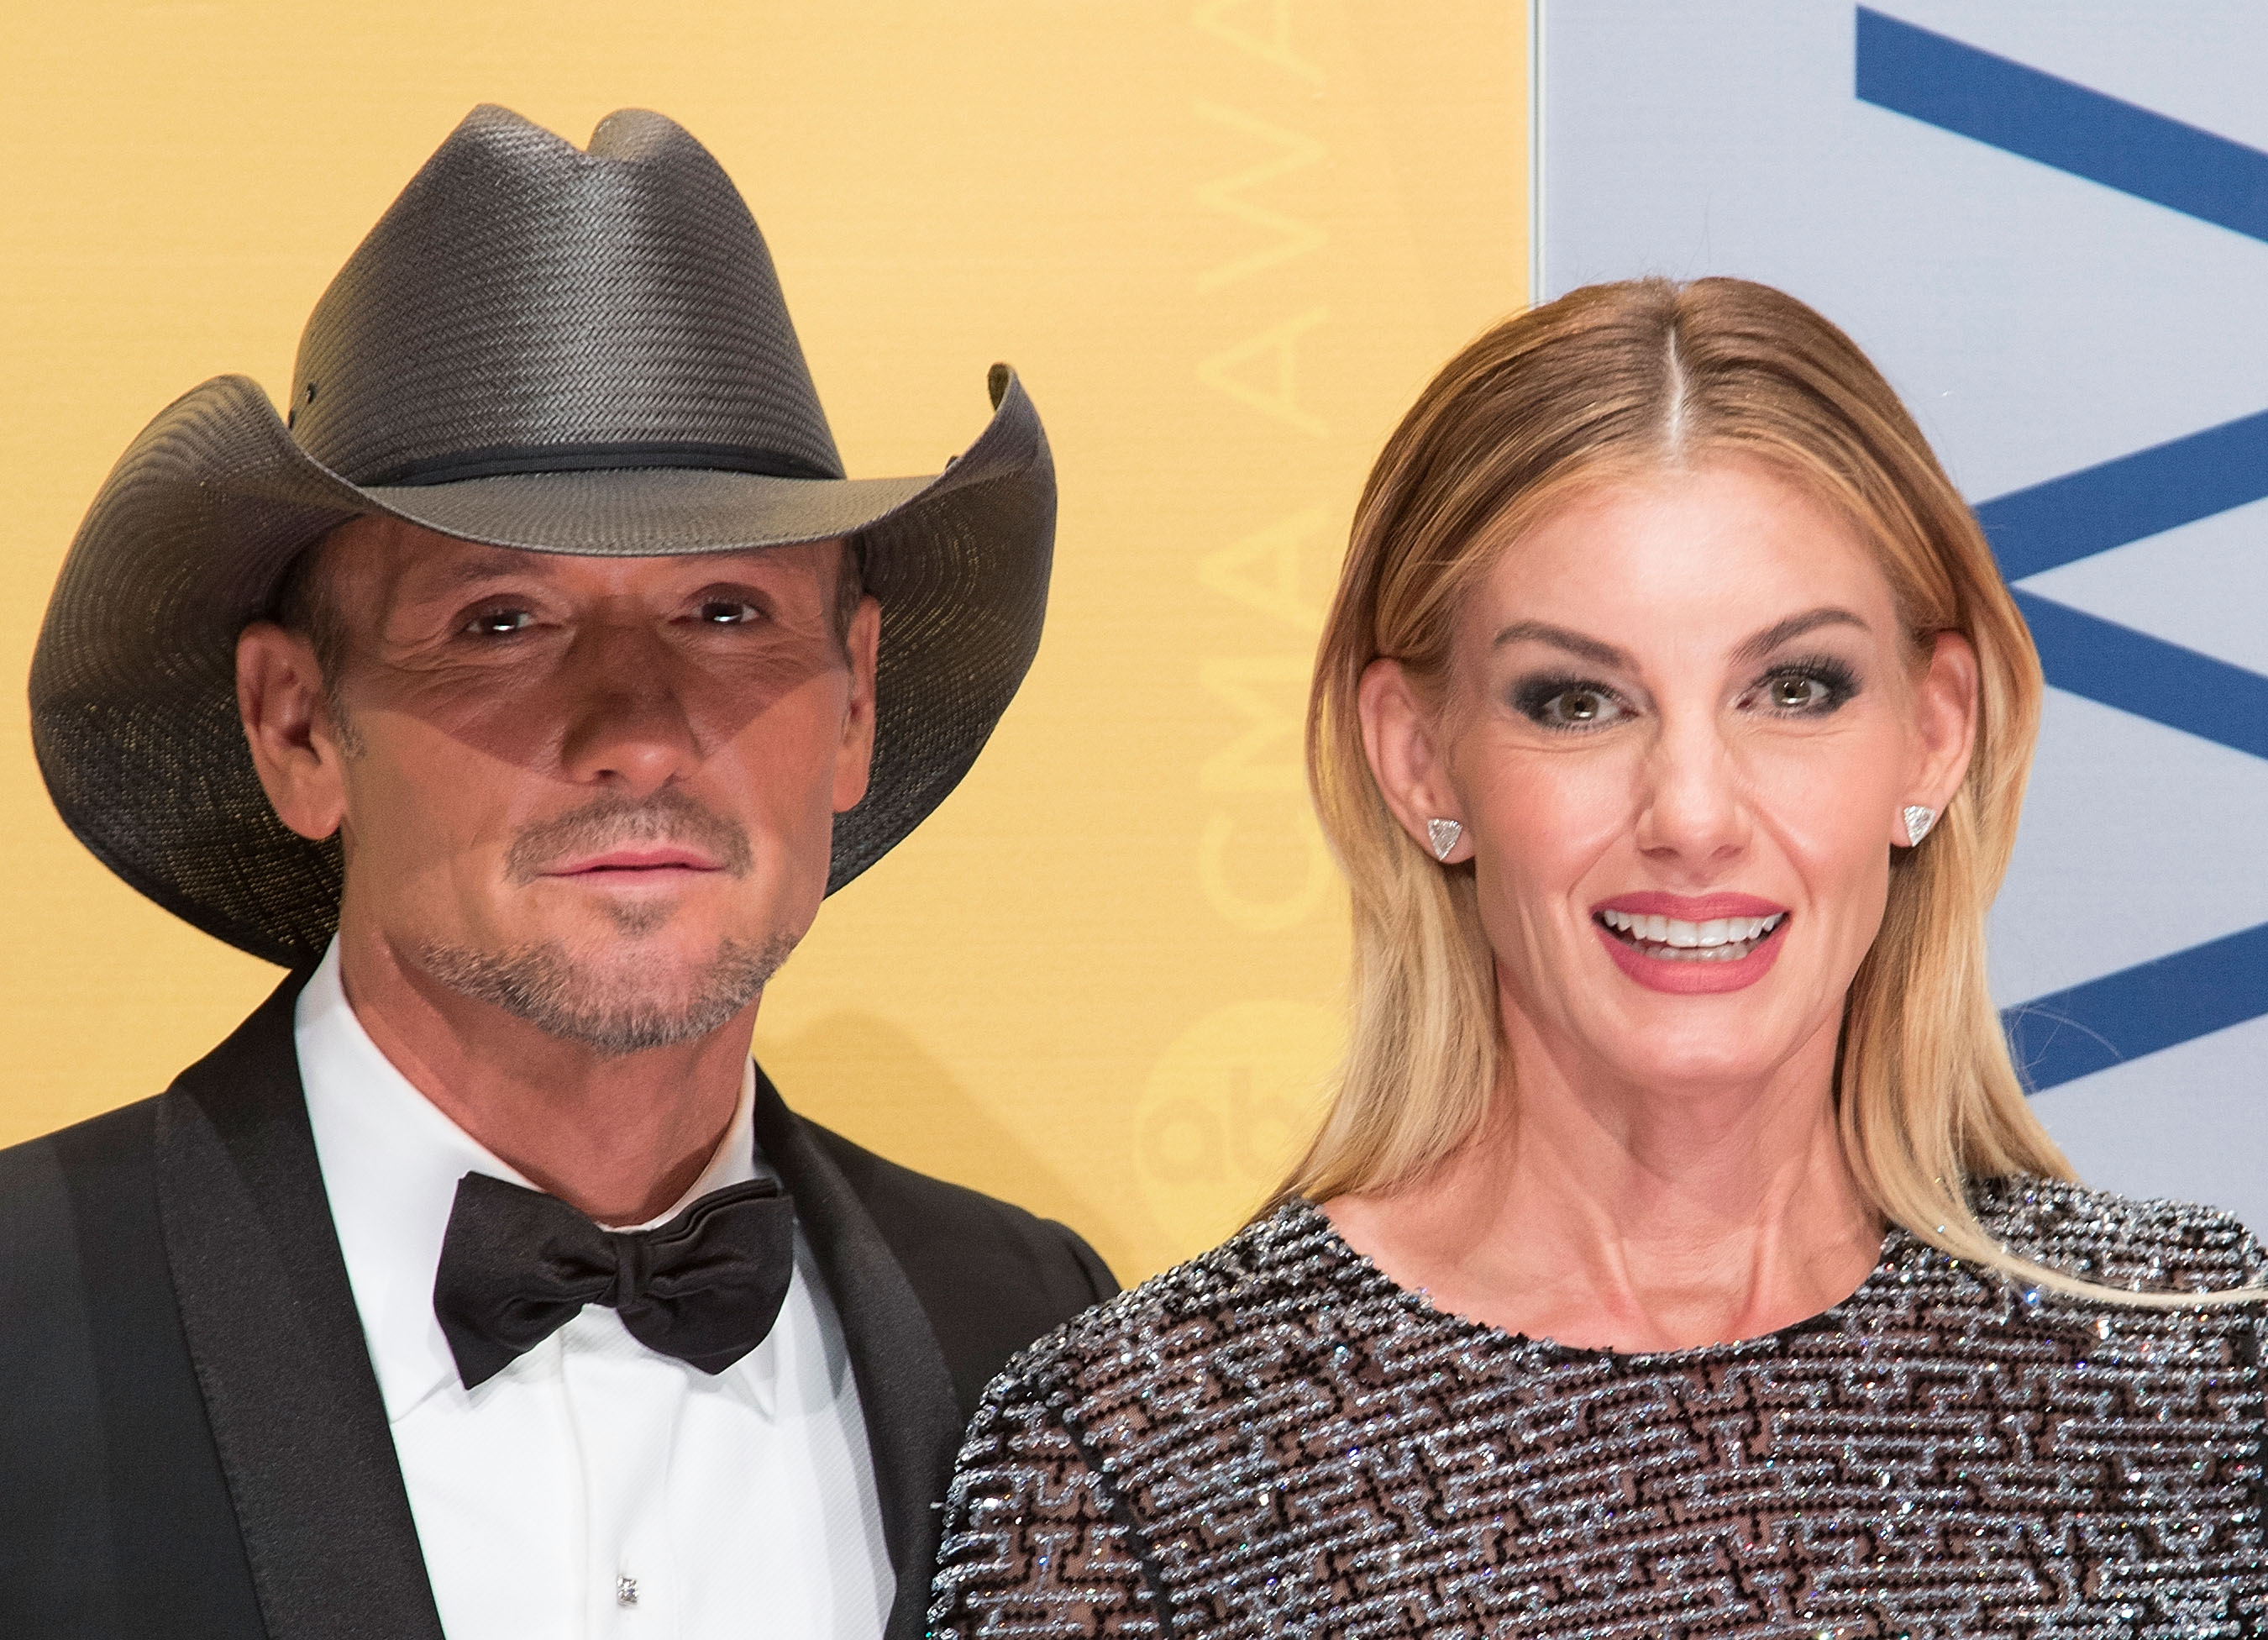 Tim McGraw and Faith Hill attend the 50th annual CMA Awards at the Bridgestone Arena on November 2, 2016, in Nashville, Tennessee. | Source: Getty Images